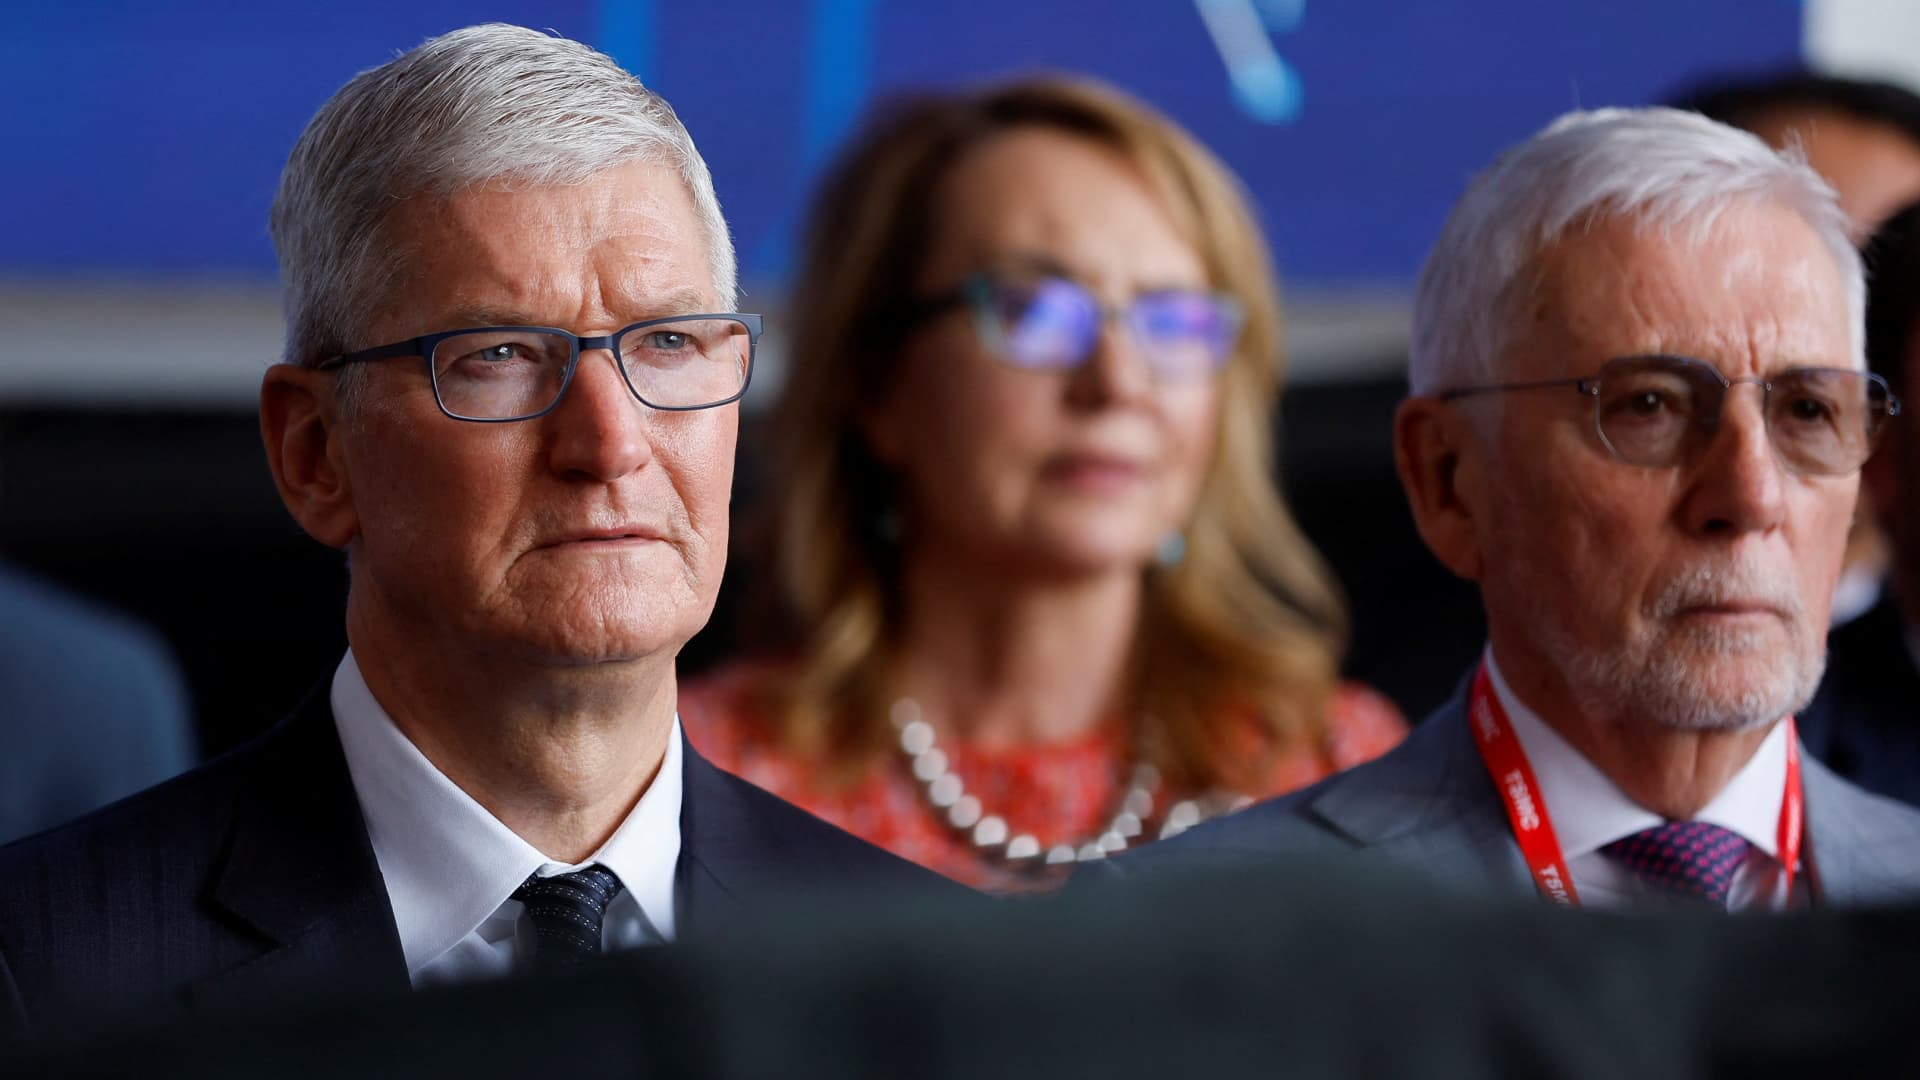 Tim Cook says Apple will use chips built in the U.S. at Arizona factory